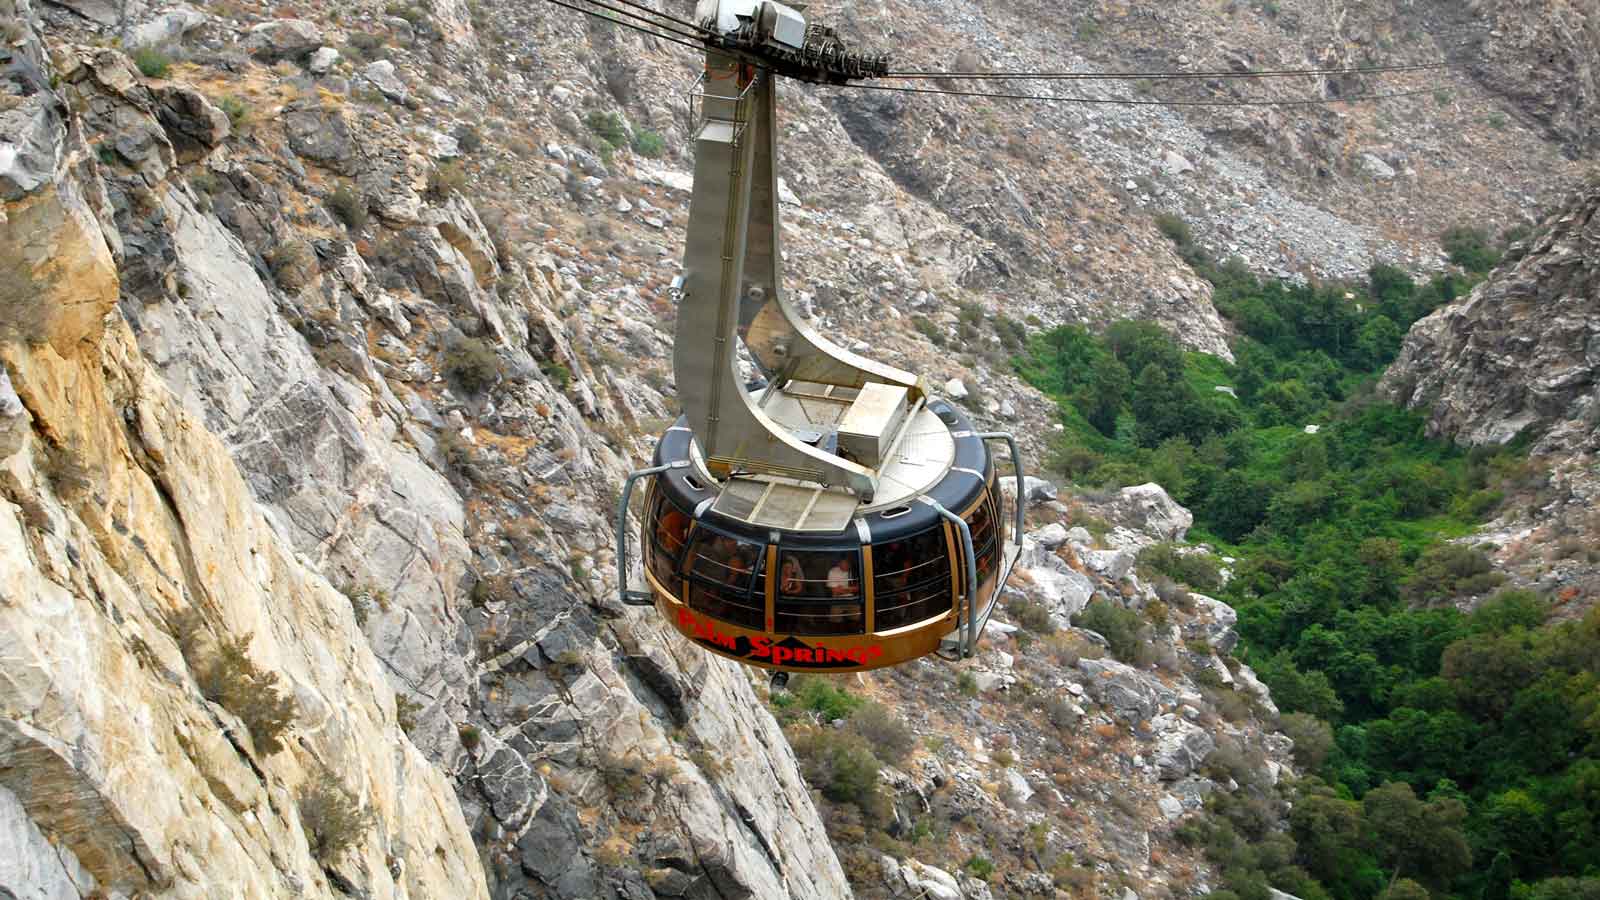 <p><span>The world’s largest rotating tram car, the Palm Springs <a href="https://pstramway.com/" rel="nofollow noopener">Aerial Tramway</a> travels over two and one-half miles along the awe-inspiring cliffs of Chino Canyon, delivering riders to the pristine grounds of the Mt. San Jacinto State Park. The trams rotate slowly during this approximate 10-minute ride, offering guests picturesque views to capture those perfect memories. </span></p><p><span>Once you reach the Mountain Station, you are greeted with two restaurants, a natural history museum, observation decks, gift shops, and over 50 miles of hiking trails to test your endurance. Tickets can be bought online beforehand.  </span></p>